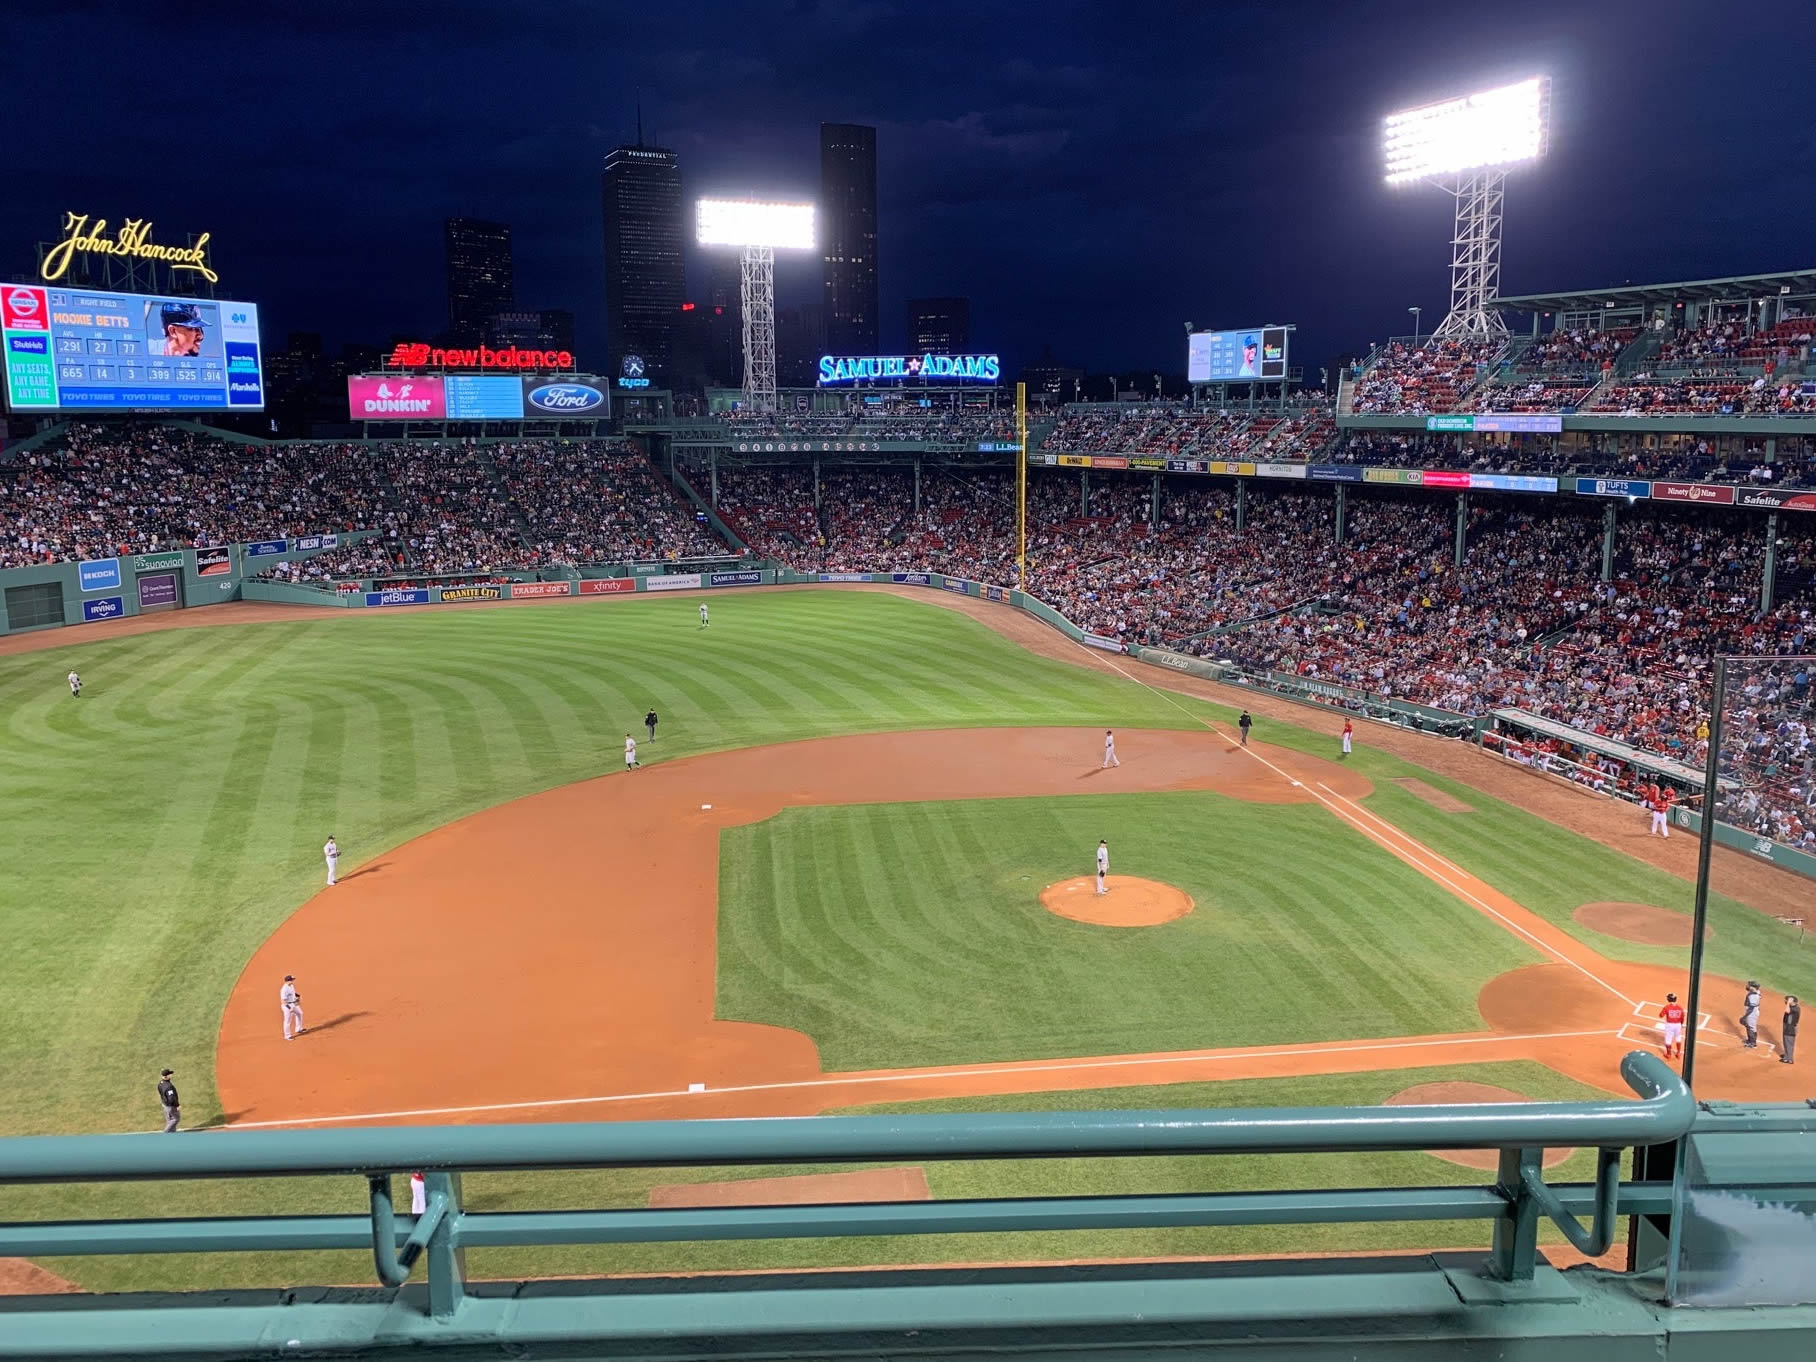 state street pavilion club 8, row 1 seat view  for baseball - fenway park